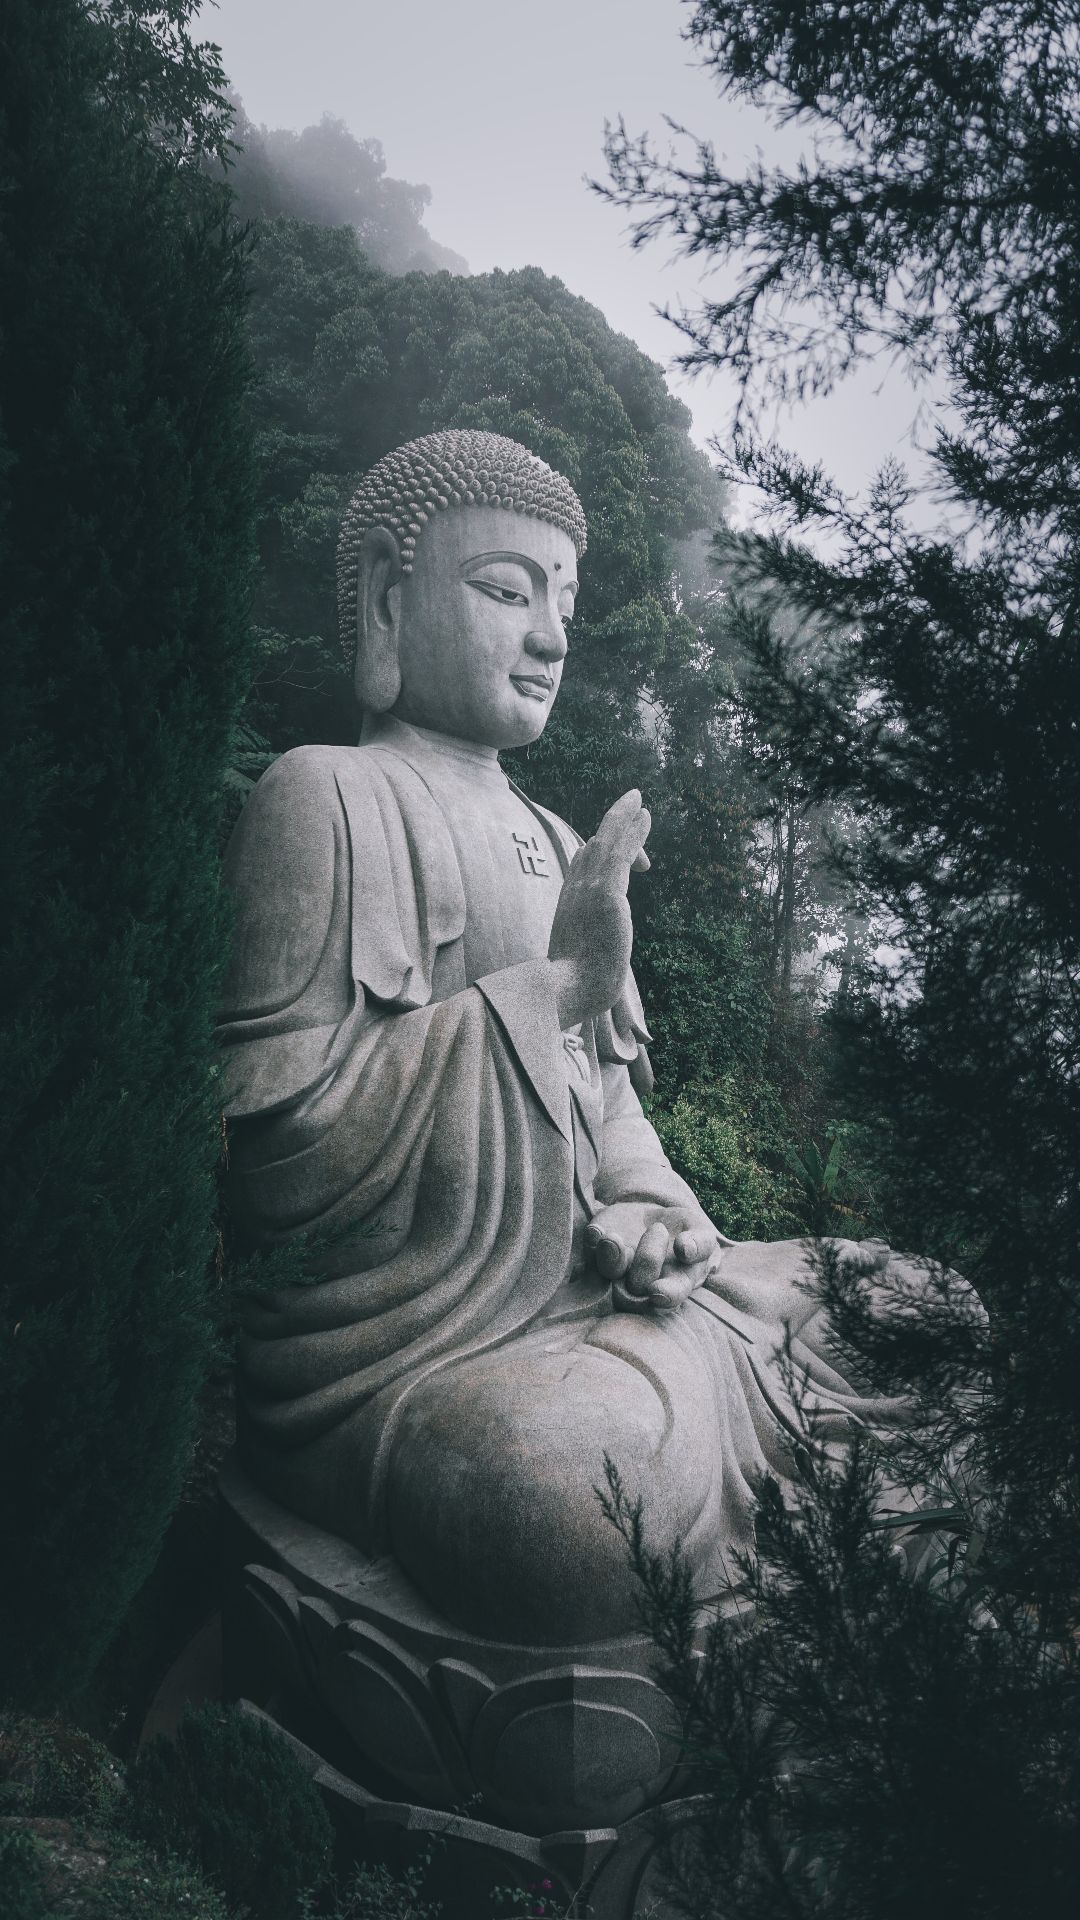 Free HD Buddha Images, Wallpaper & Photos | 5,000+ High-Quality Stock  Pictures - Pixabay